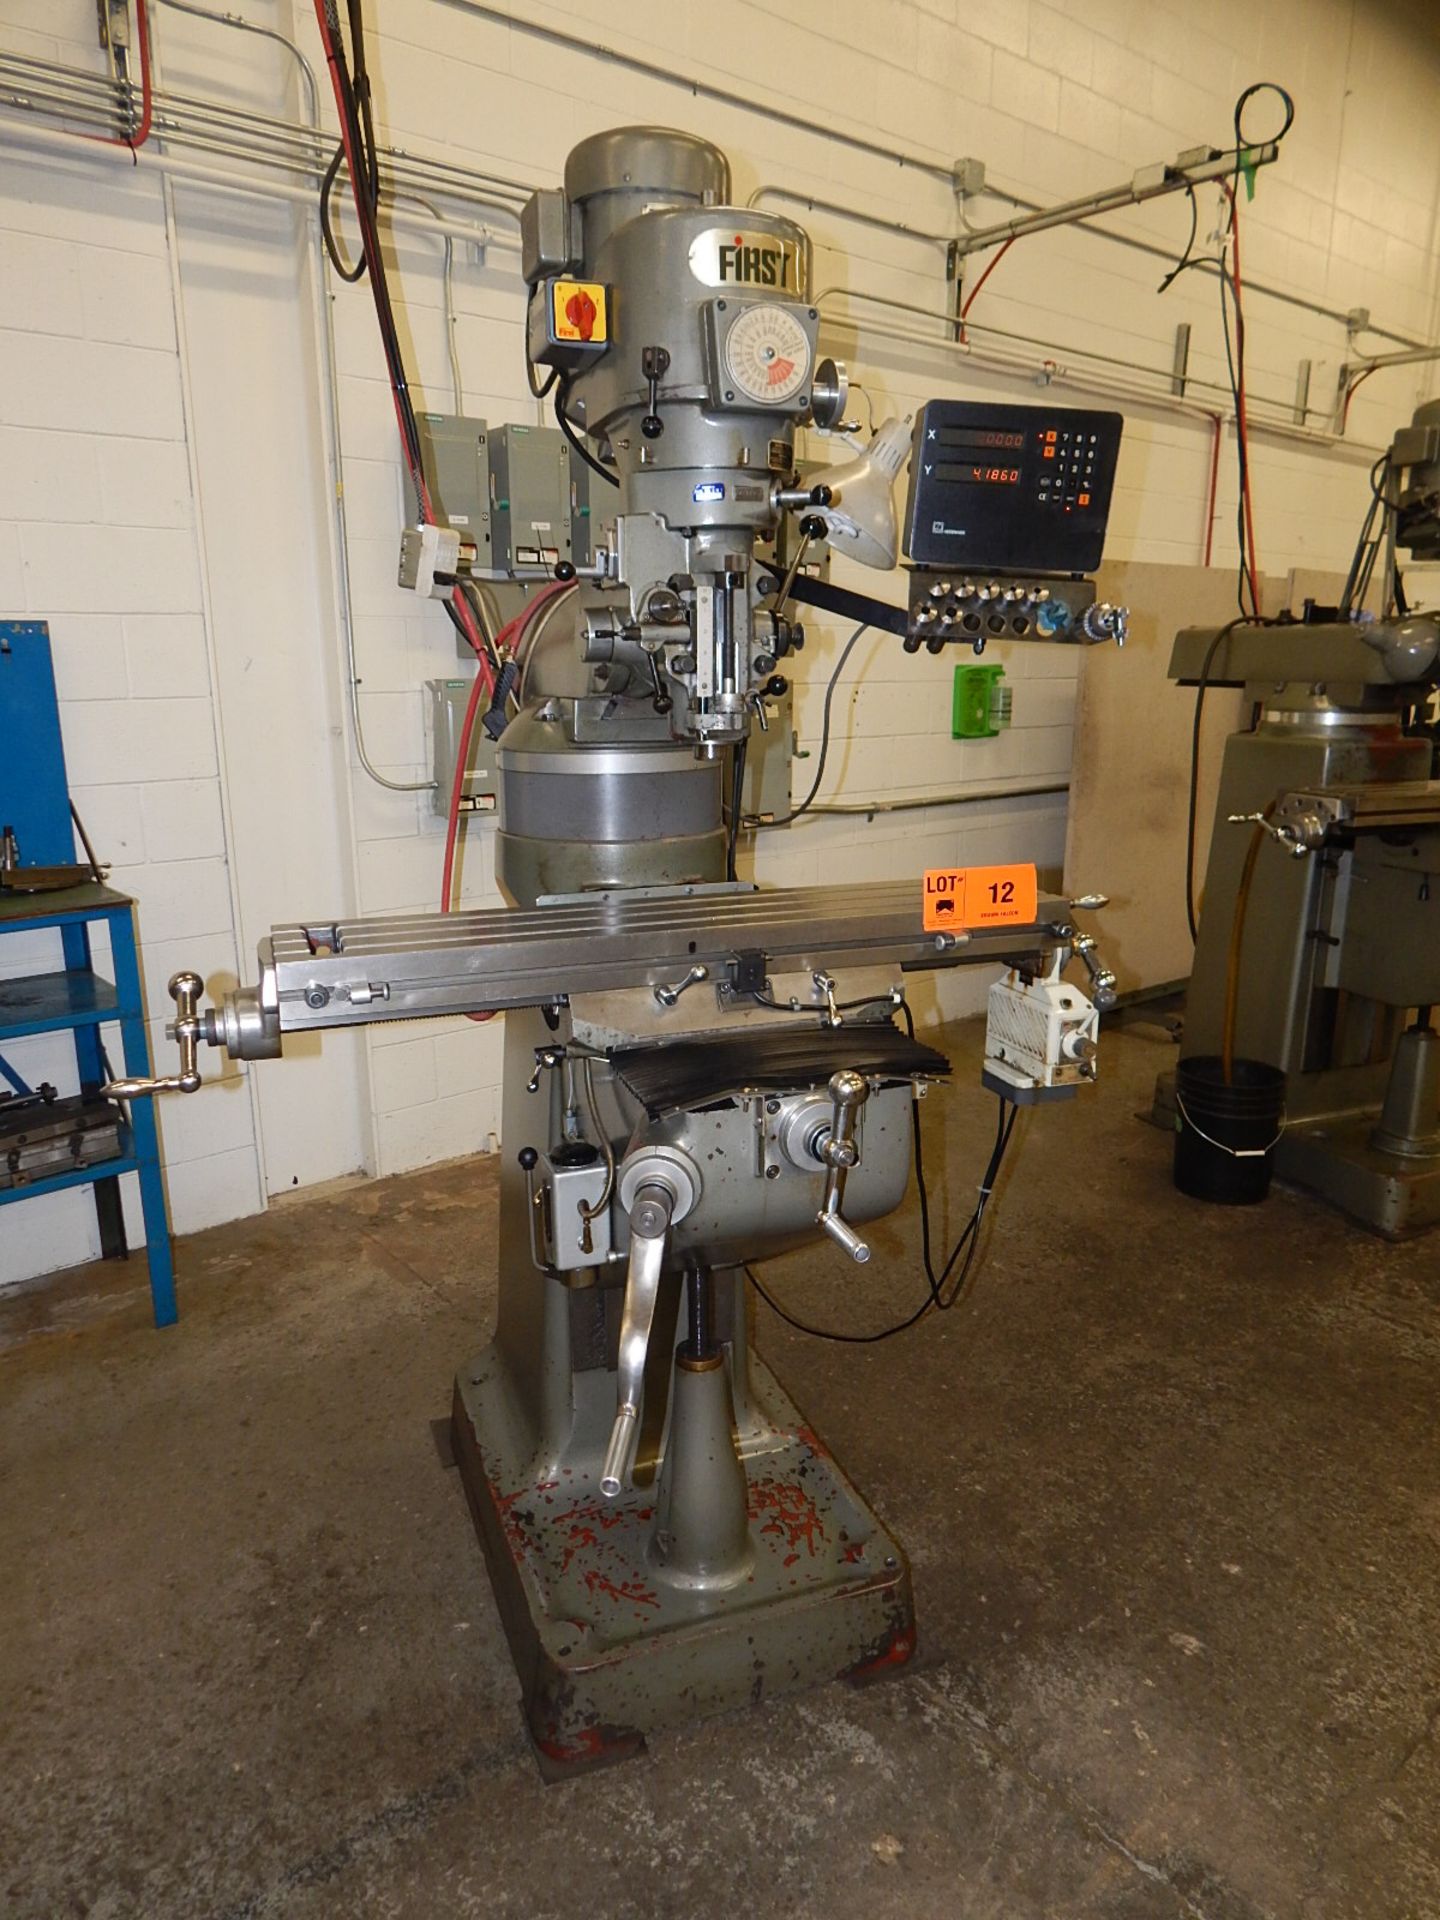 FIRST TURRET MILLING MACHINE WITH SPEEDS TO 4500 RPM, 36" X 9" T-SLOT TABLE WITH POWER FEED CONTROL, - Image 4 of 4